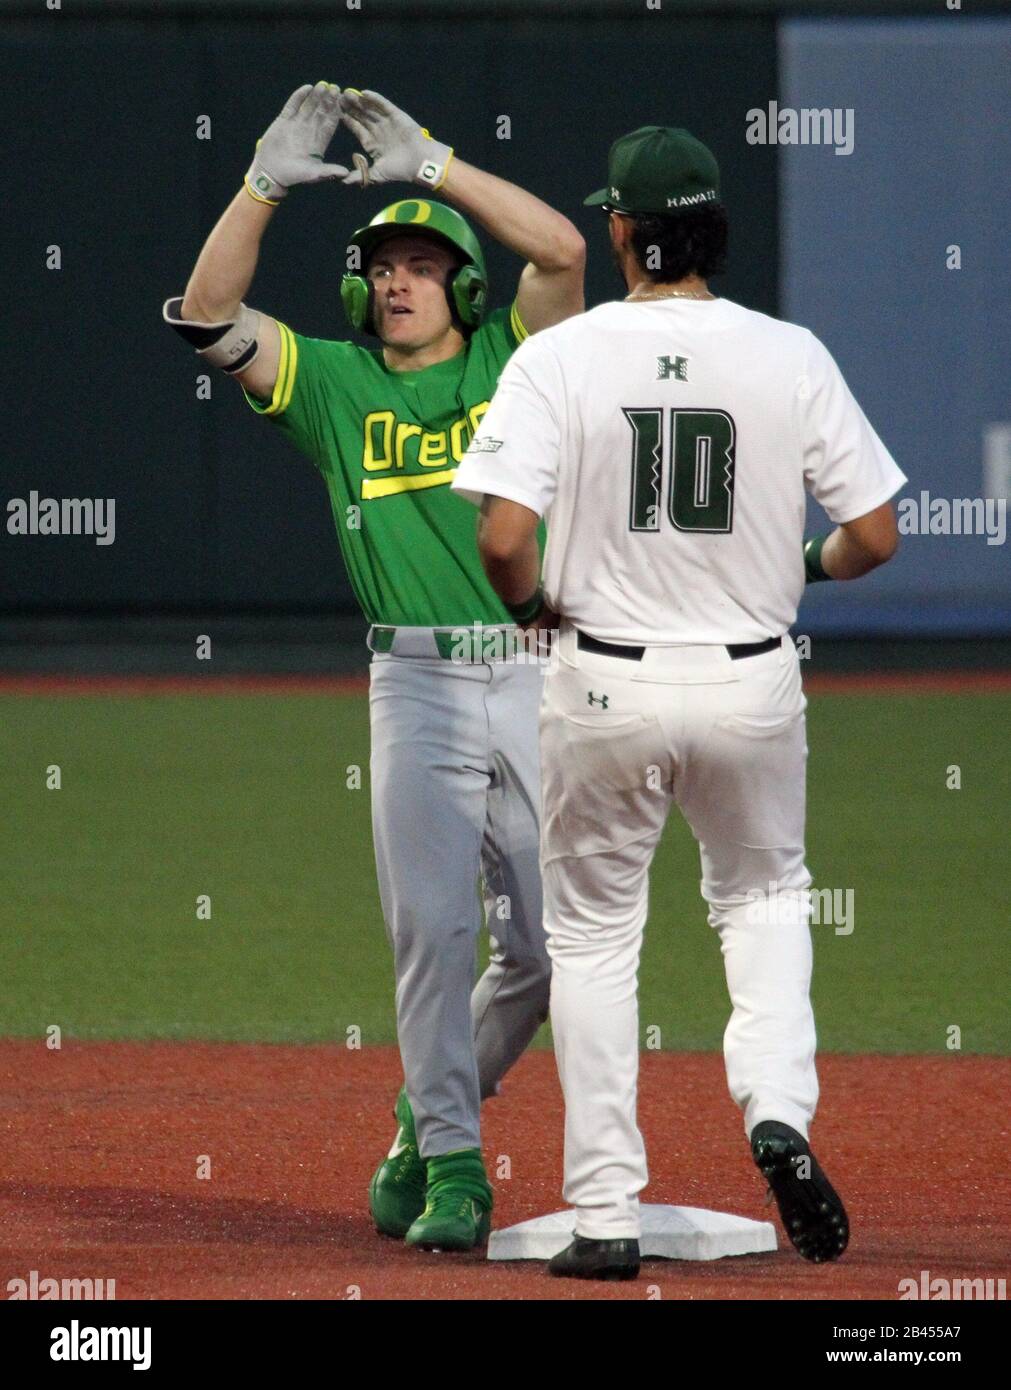 March 5, 2020 - Oregon Ducks outfielder Tanner Smith (310 shows an 'O' to the dugout after hitting a double in the first inning of a game between the Oregon Ducks and the Hawaii Rainbow Warriors at Les Murakami Stadium in Honolulu, HI - Michael Sullivan/CSM Stock Photo